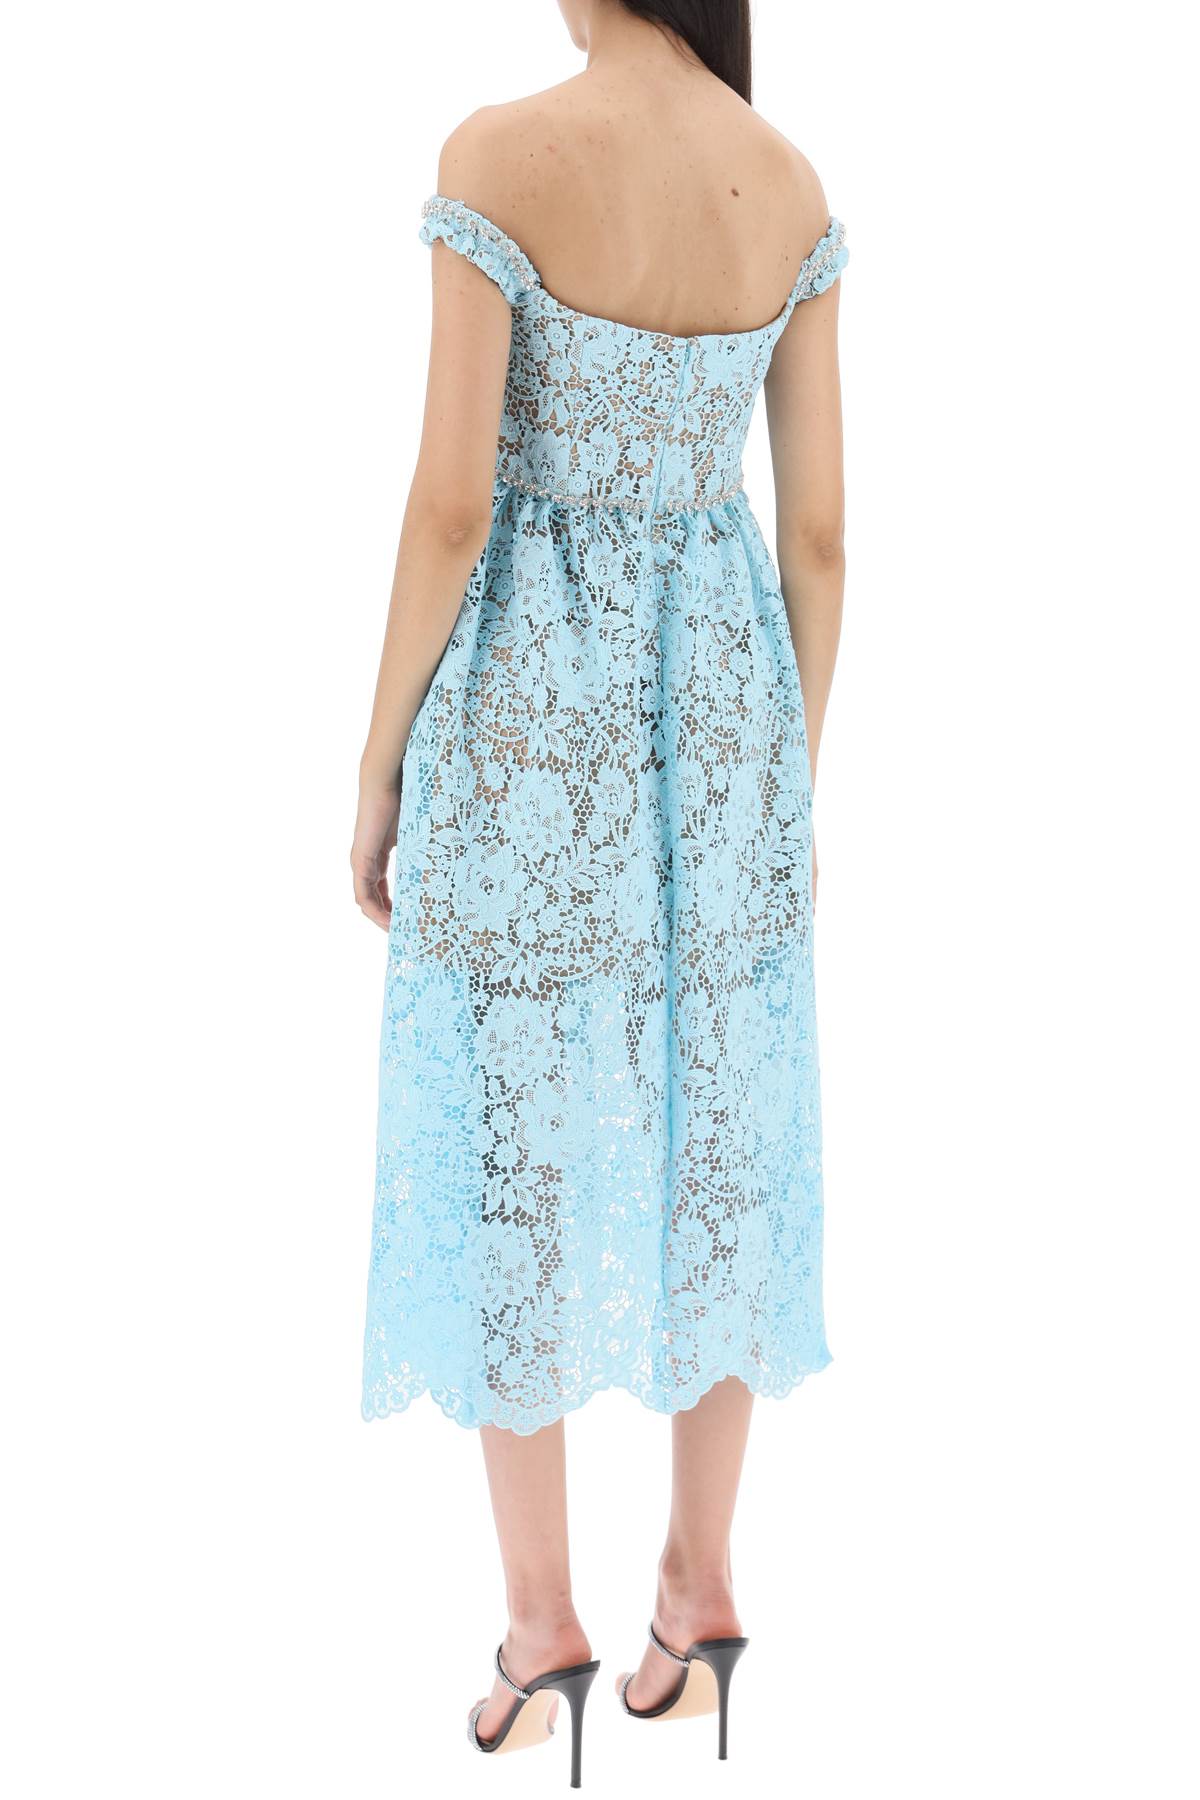 SELF-PORTRAIT Blue Floral Lace Midi Dress with Crystal Embellishments